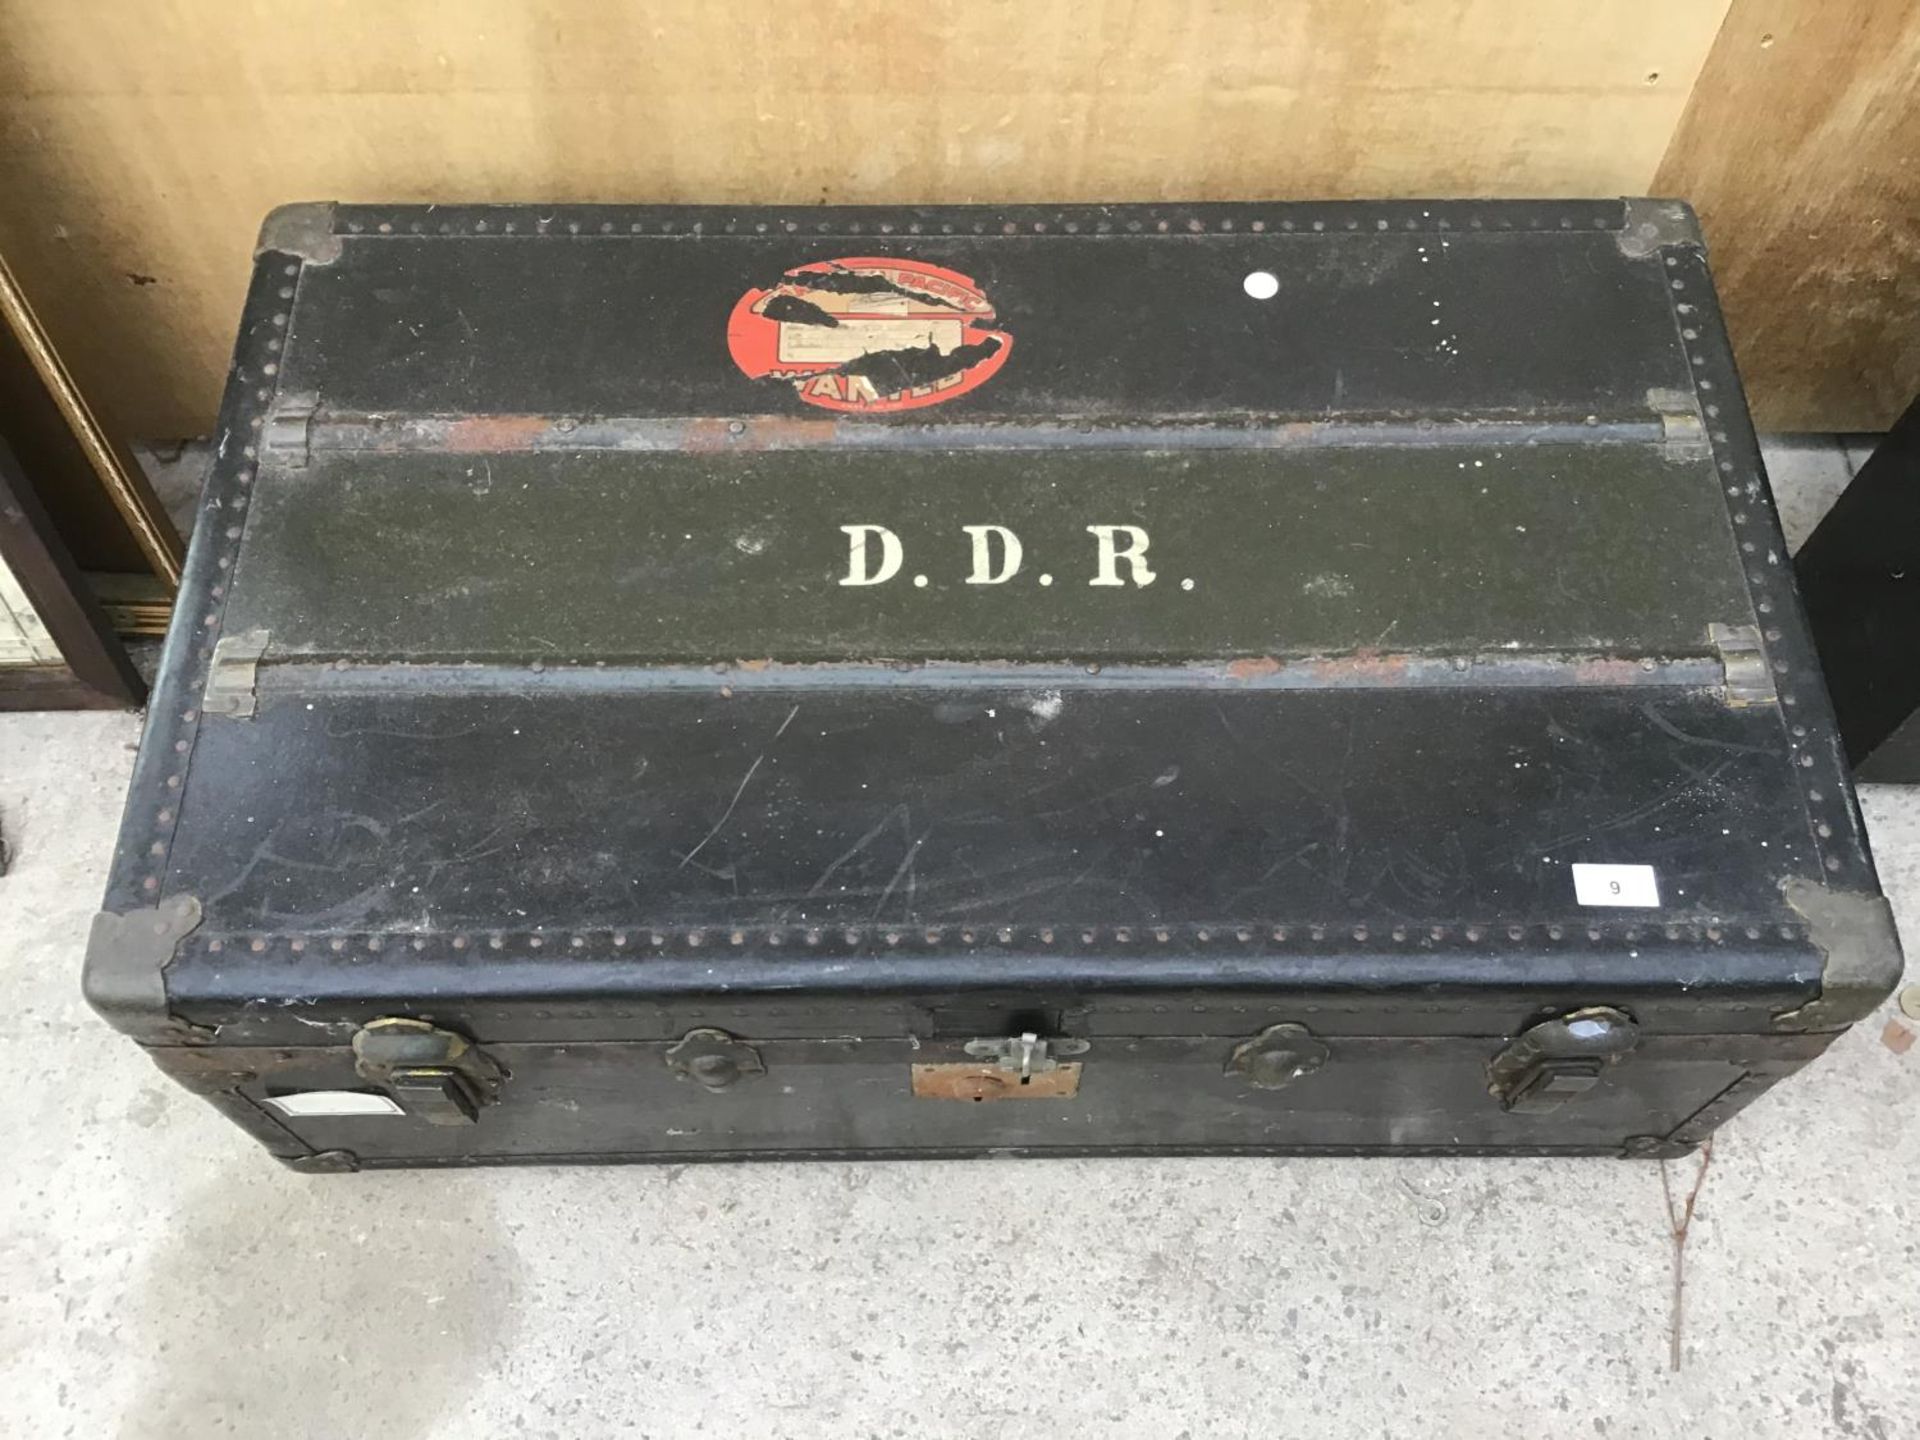 A VINTAGE TRAVEL CHEST IN GOOD CONDITION WITH INNER TRAY